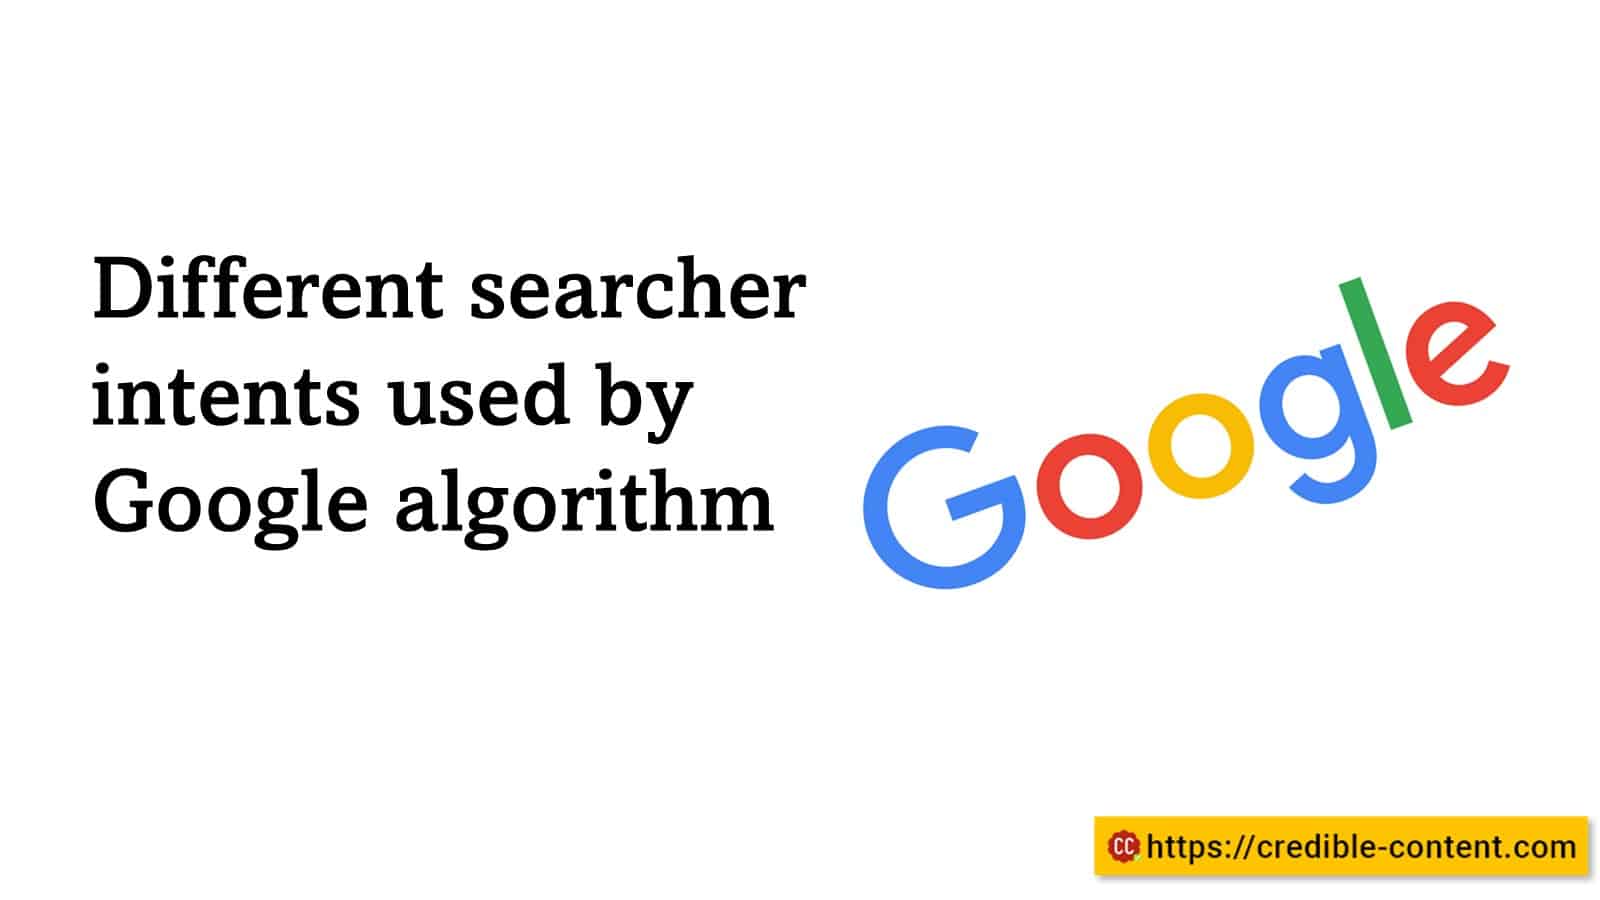 Different searcher intents used by Google algorithm